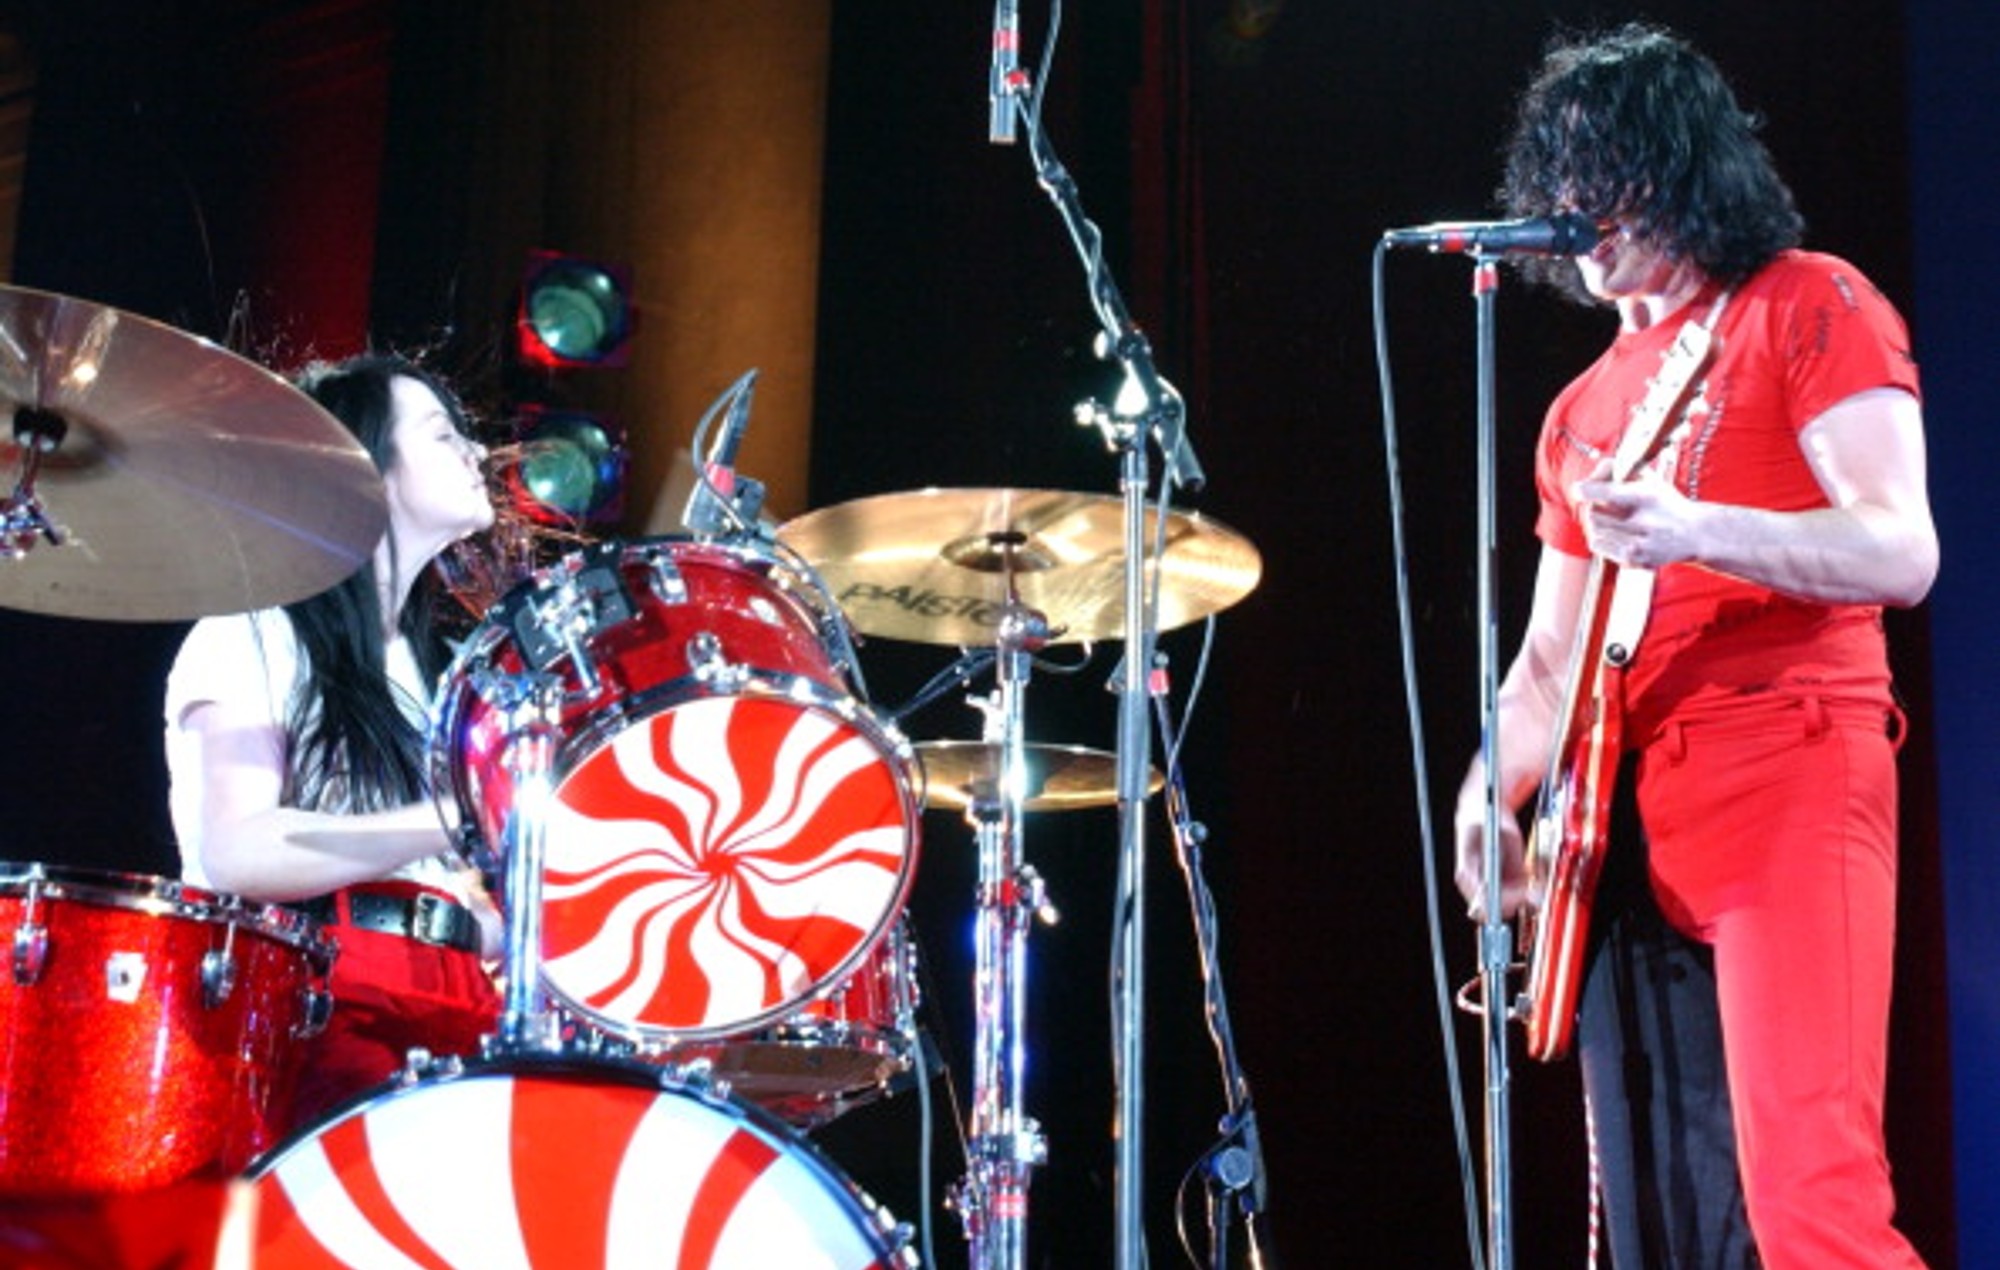 Jack White speaks out on recent Meg White drumming controversy